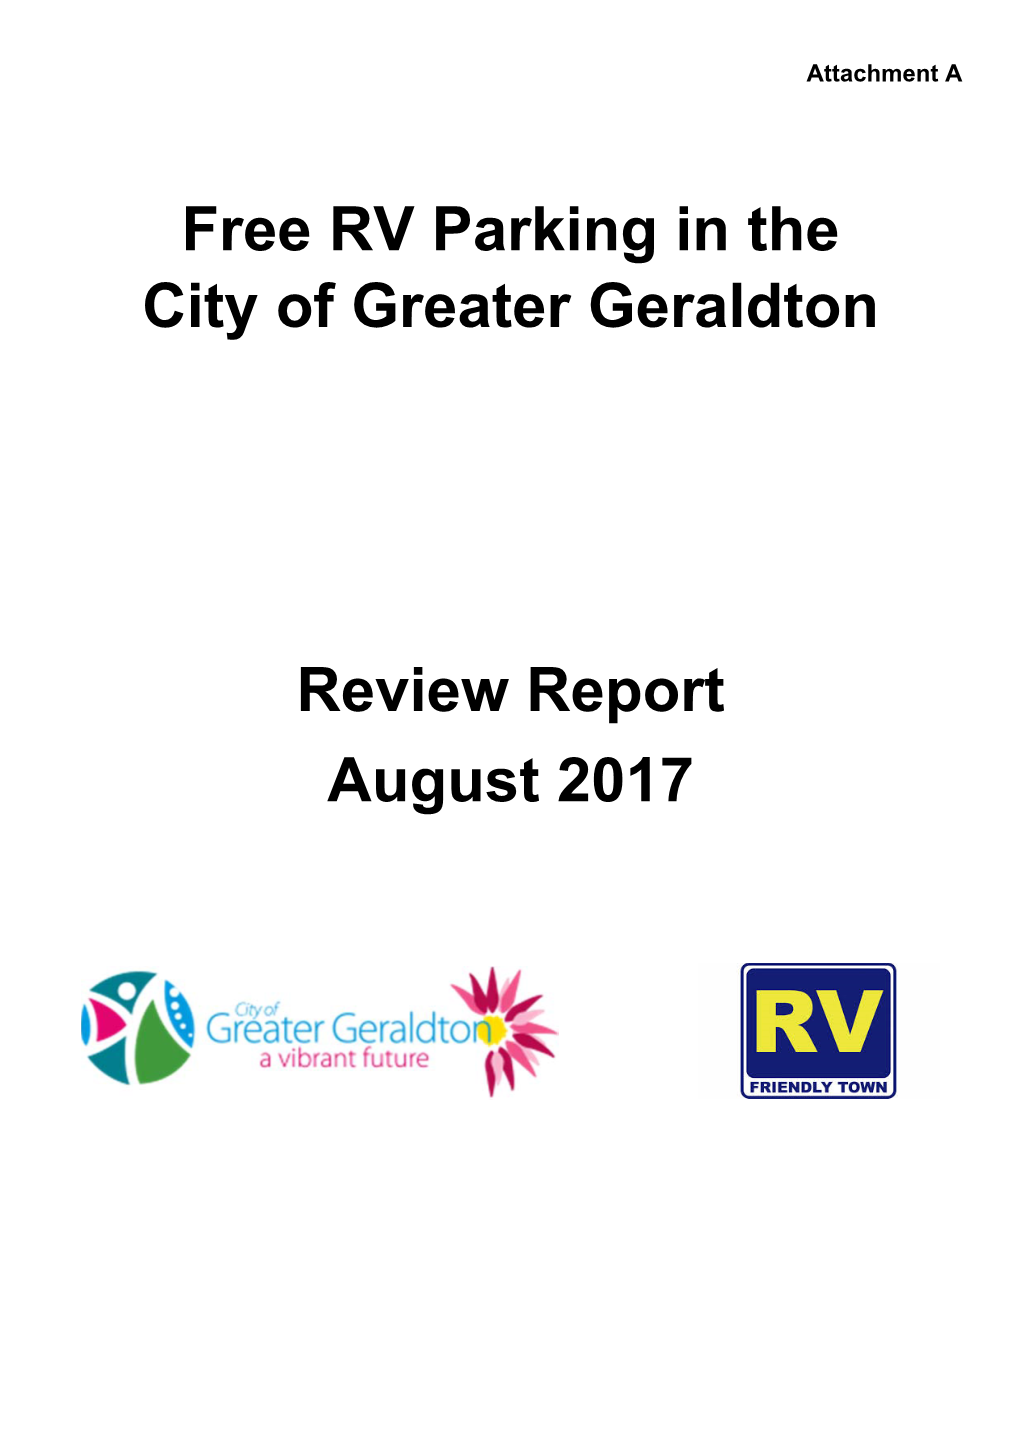 Free RV Parking in the City of Greater Geraldton Review Report August